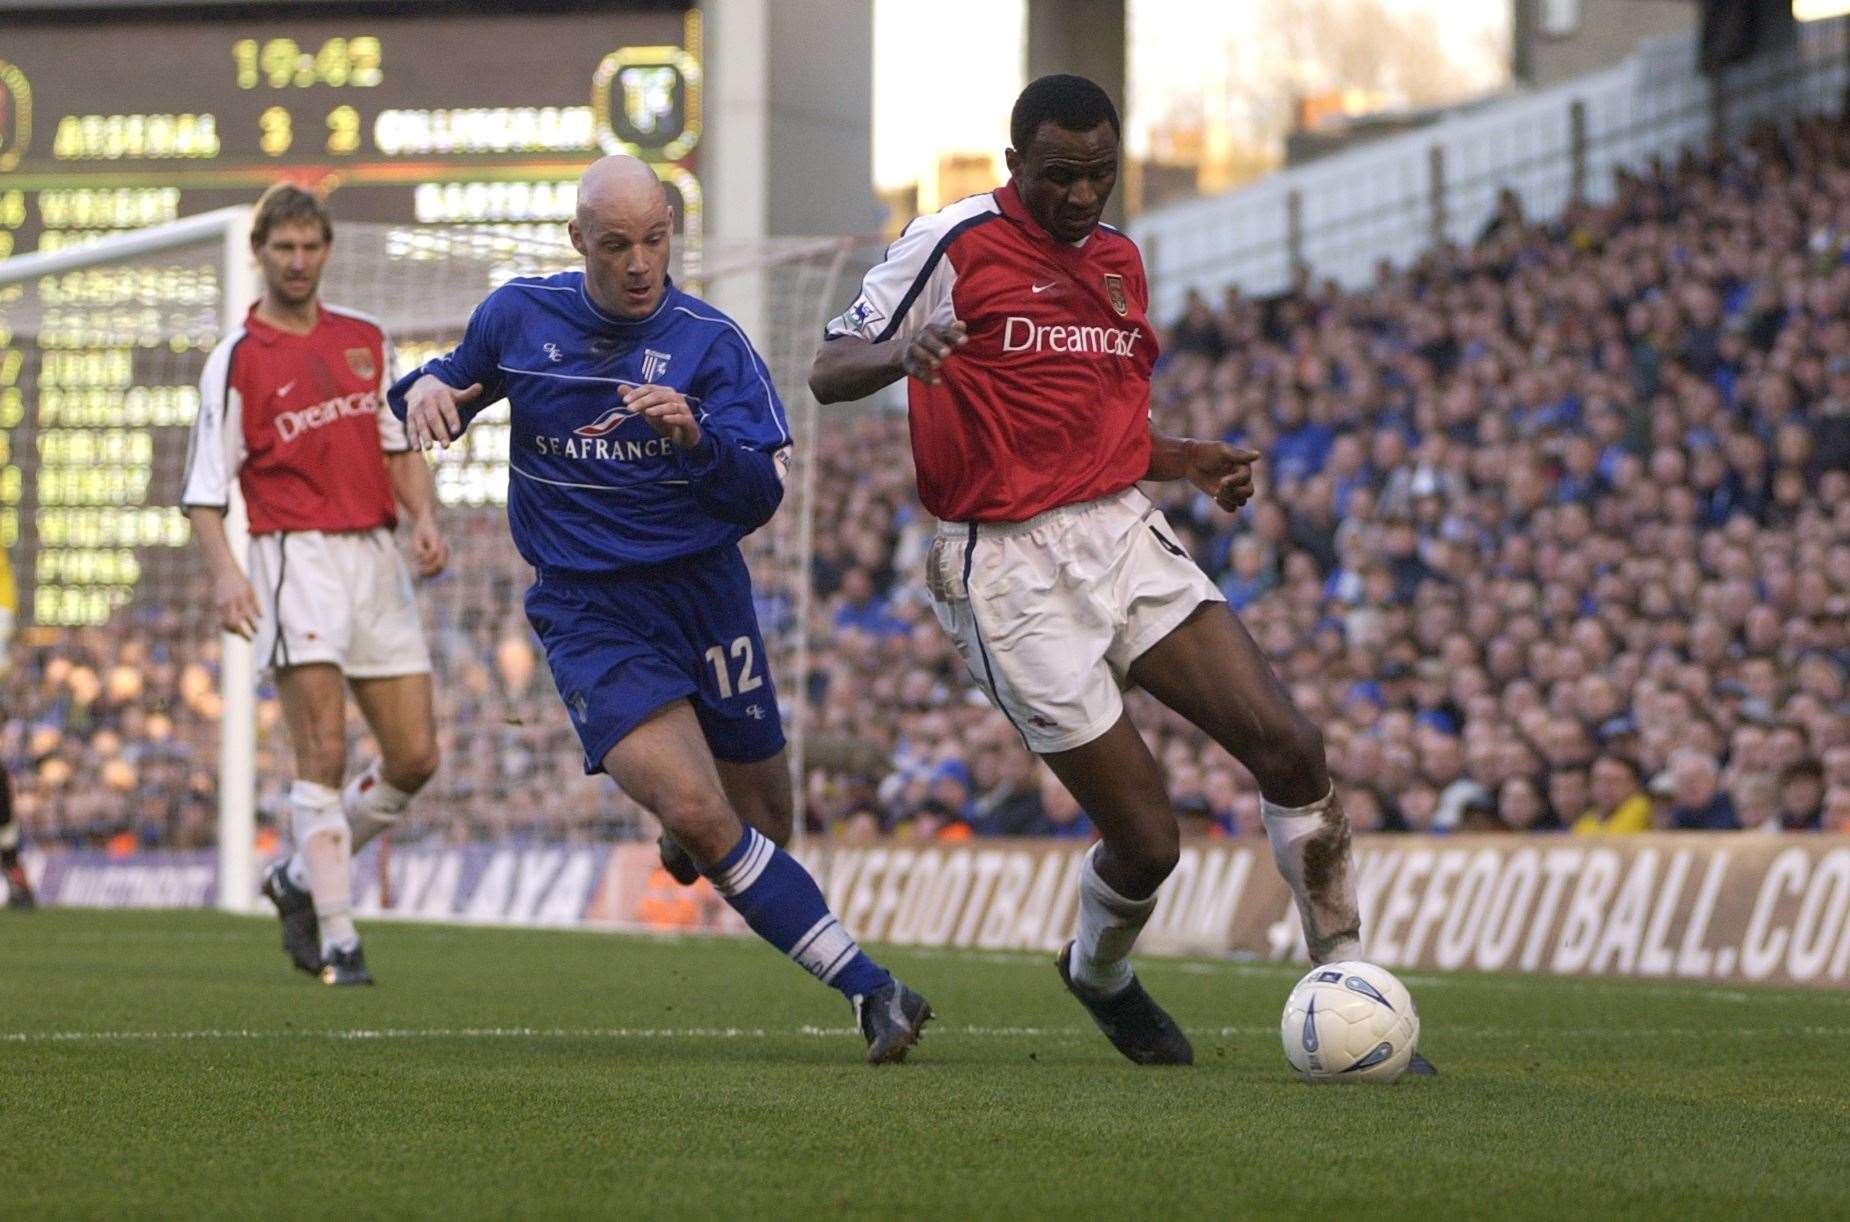 Arsenal v Gillingham at Highbury, 2002 – a game marred only by our columnist’s father jumping up to celebrate a Gills’ goal while in the Arsenal end